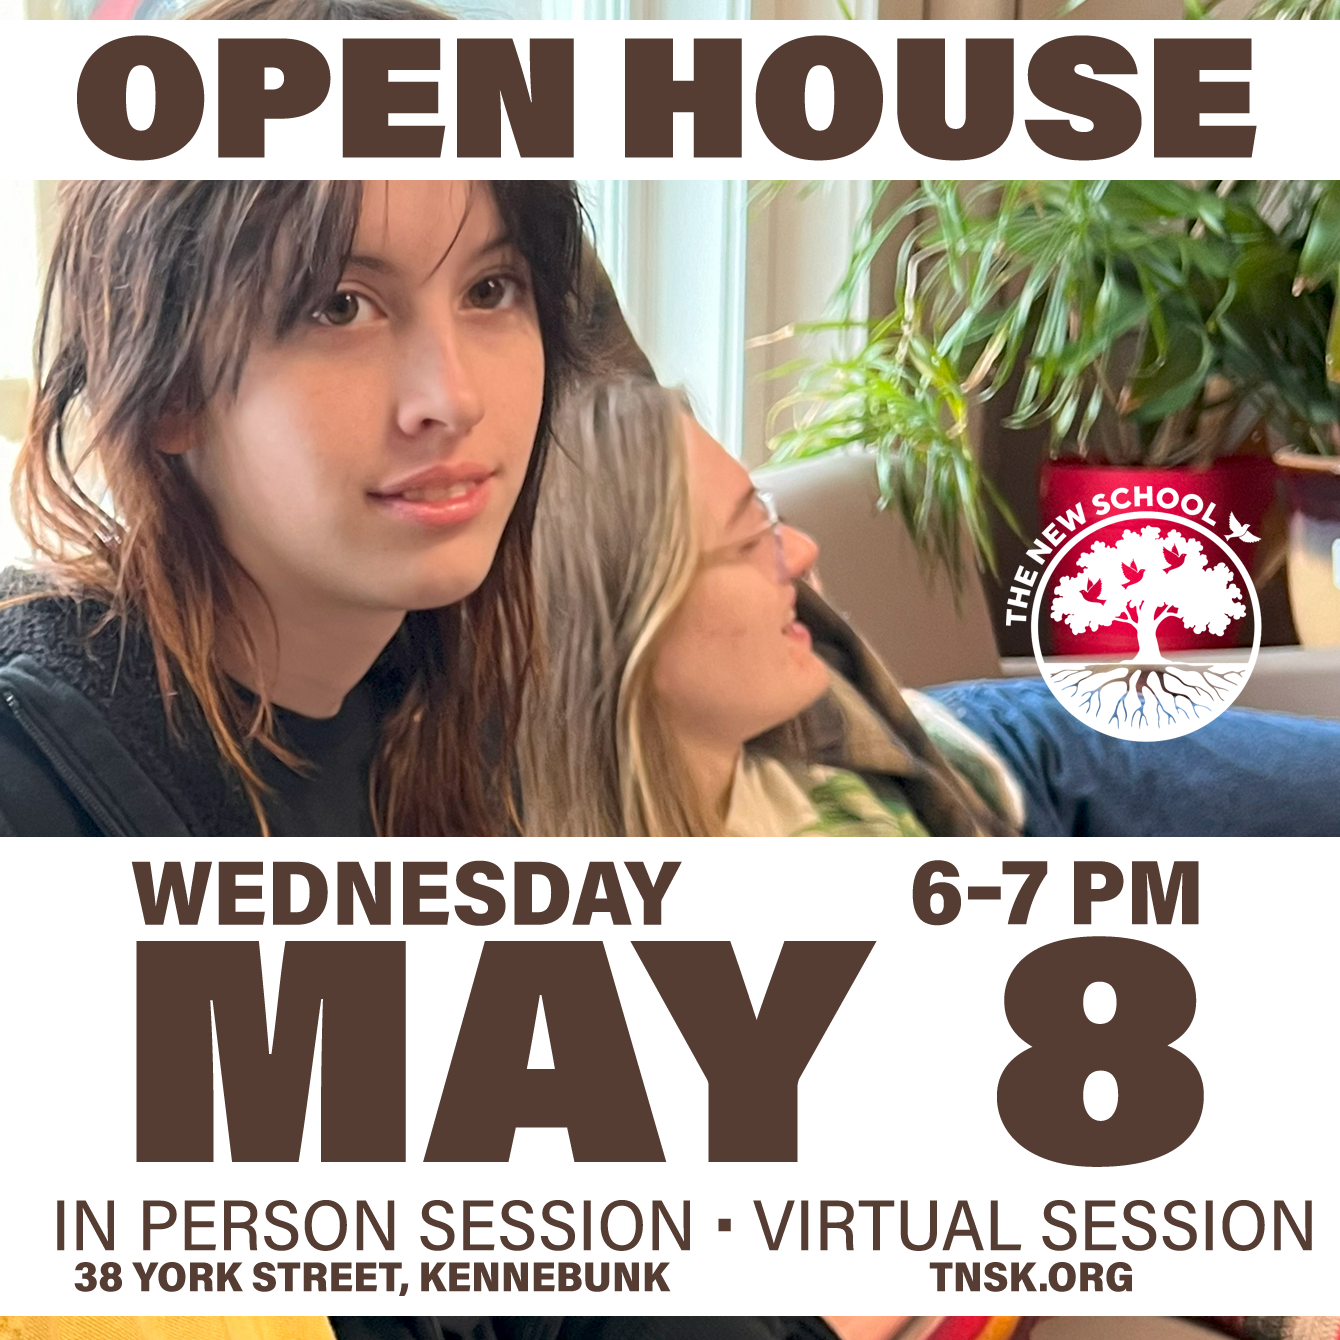 Open House: Wednesday, May 8th, at 6-7 pm. Other text on this image indicate that in-person and virtual meetings are happening. Two students, Max and Courtlynn, are sitting in the common room.